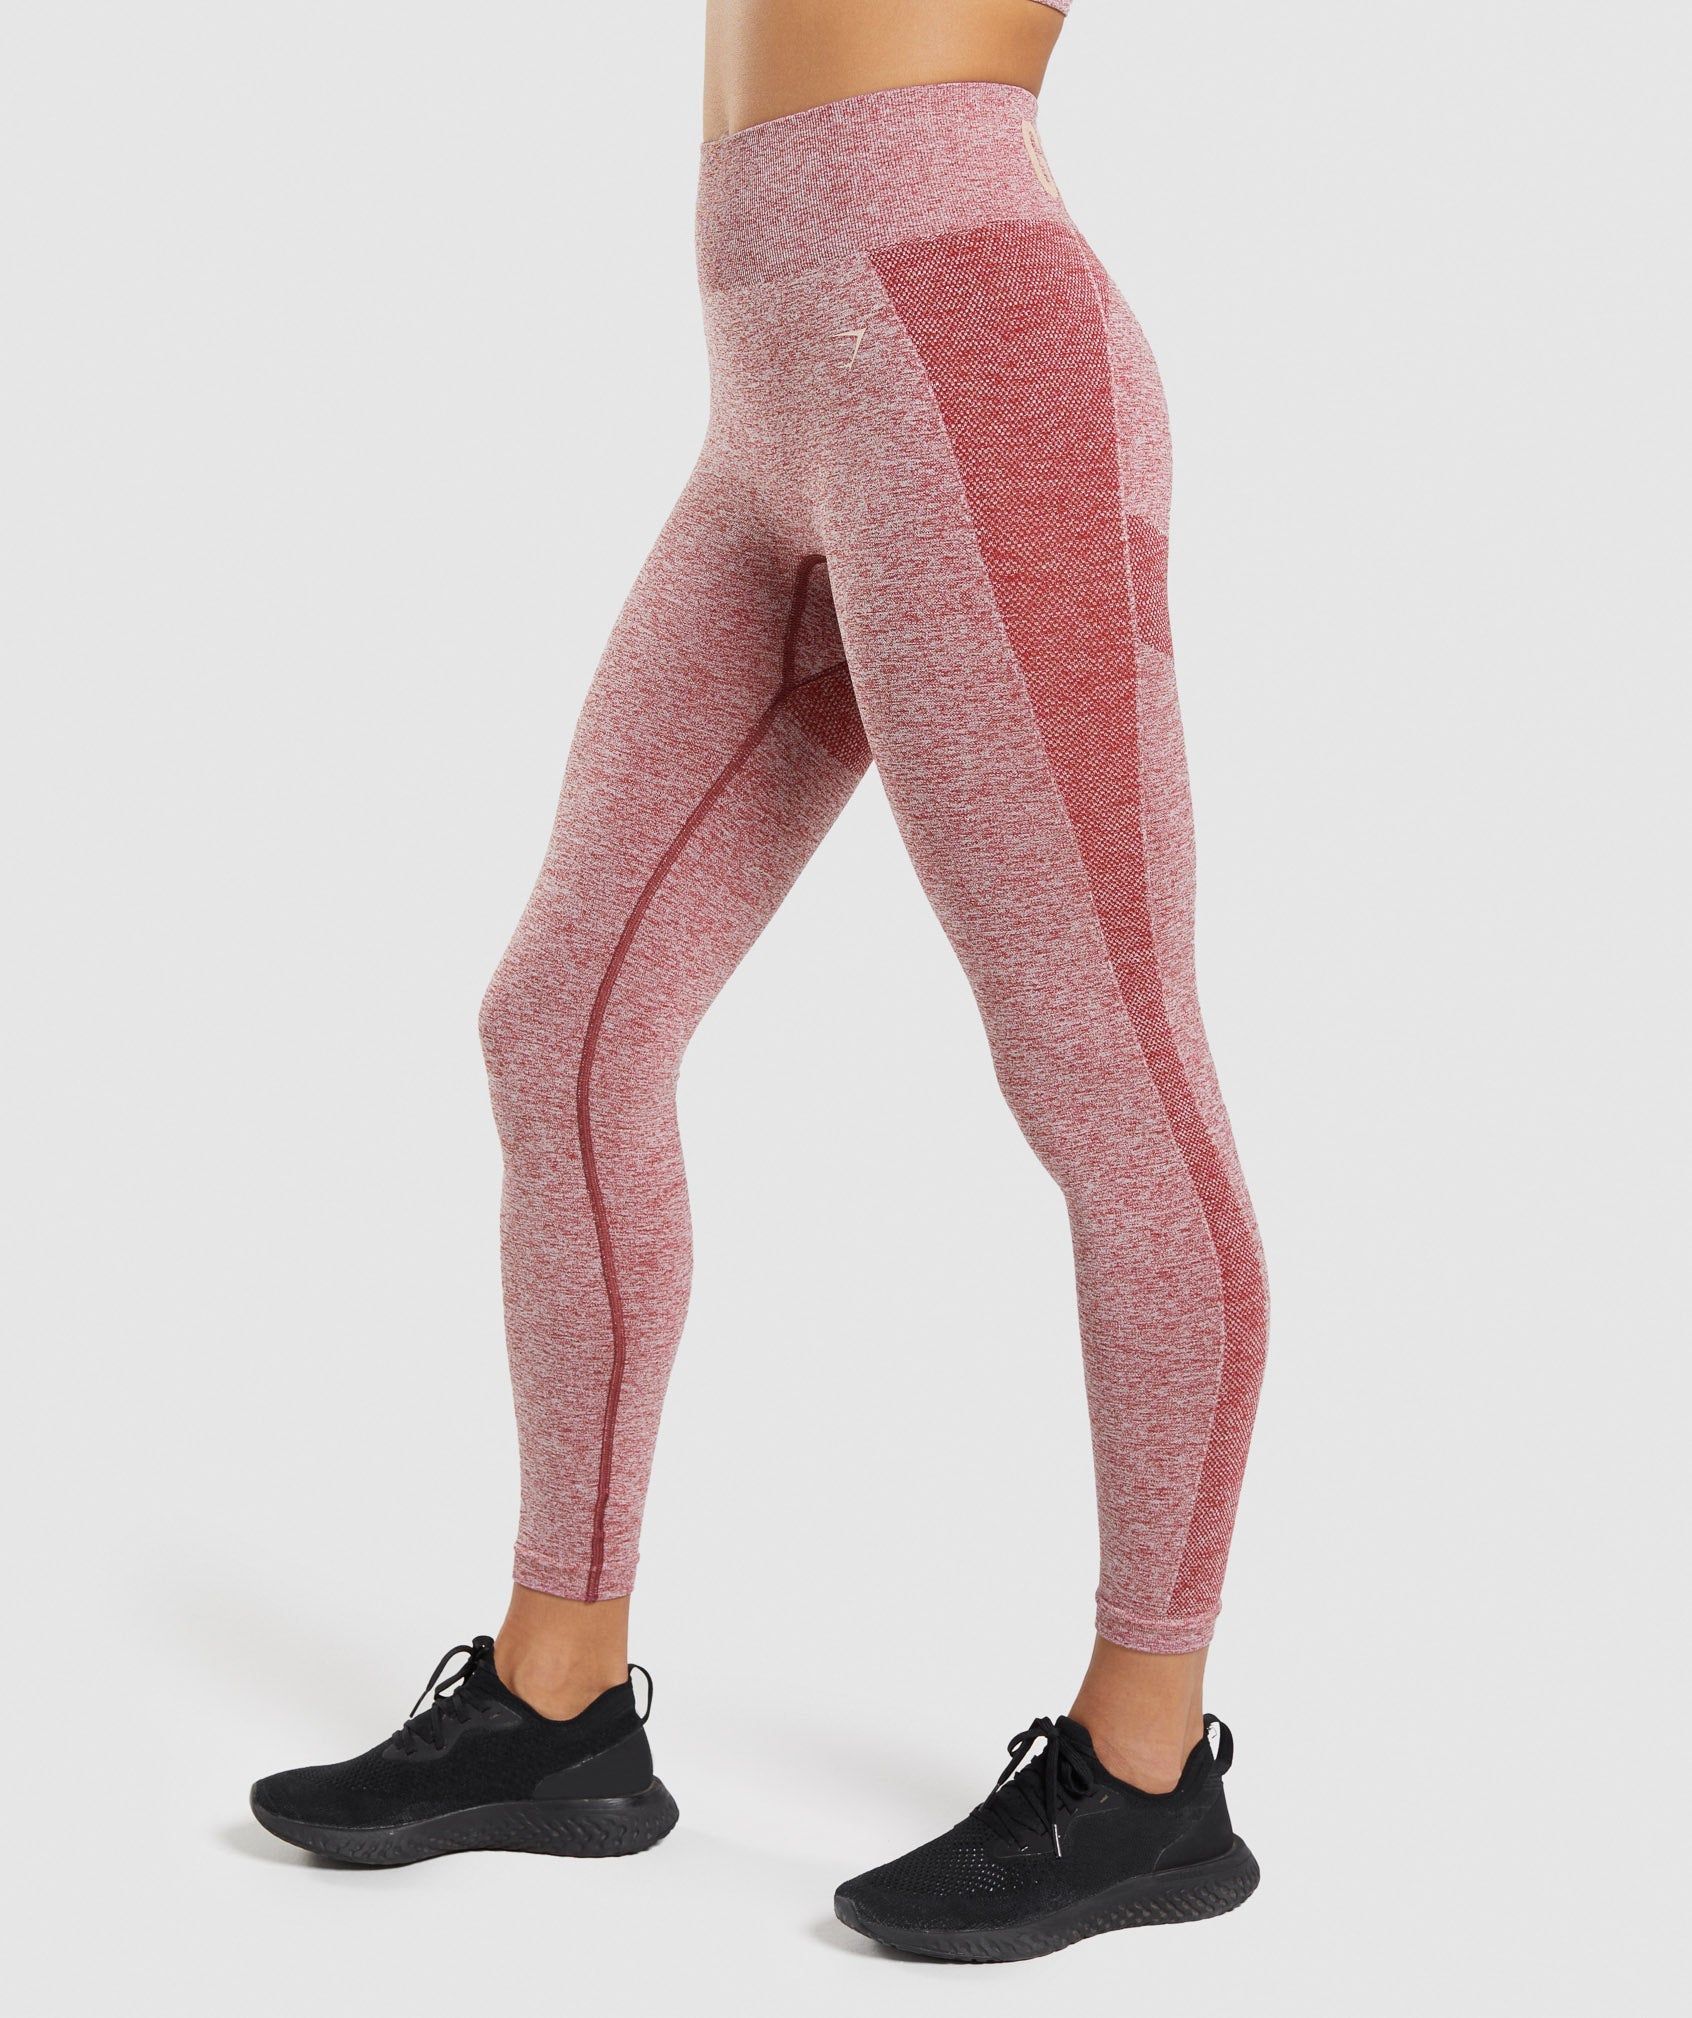 Gymshark red wine color energy seamless high waisted activewear leggings  small​ - $53 - From Paydin